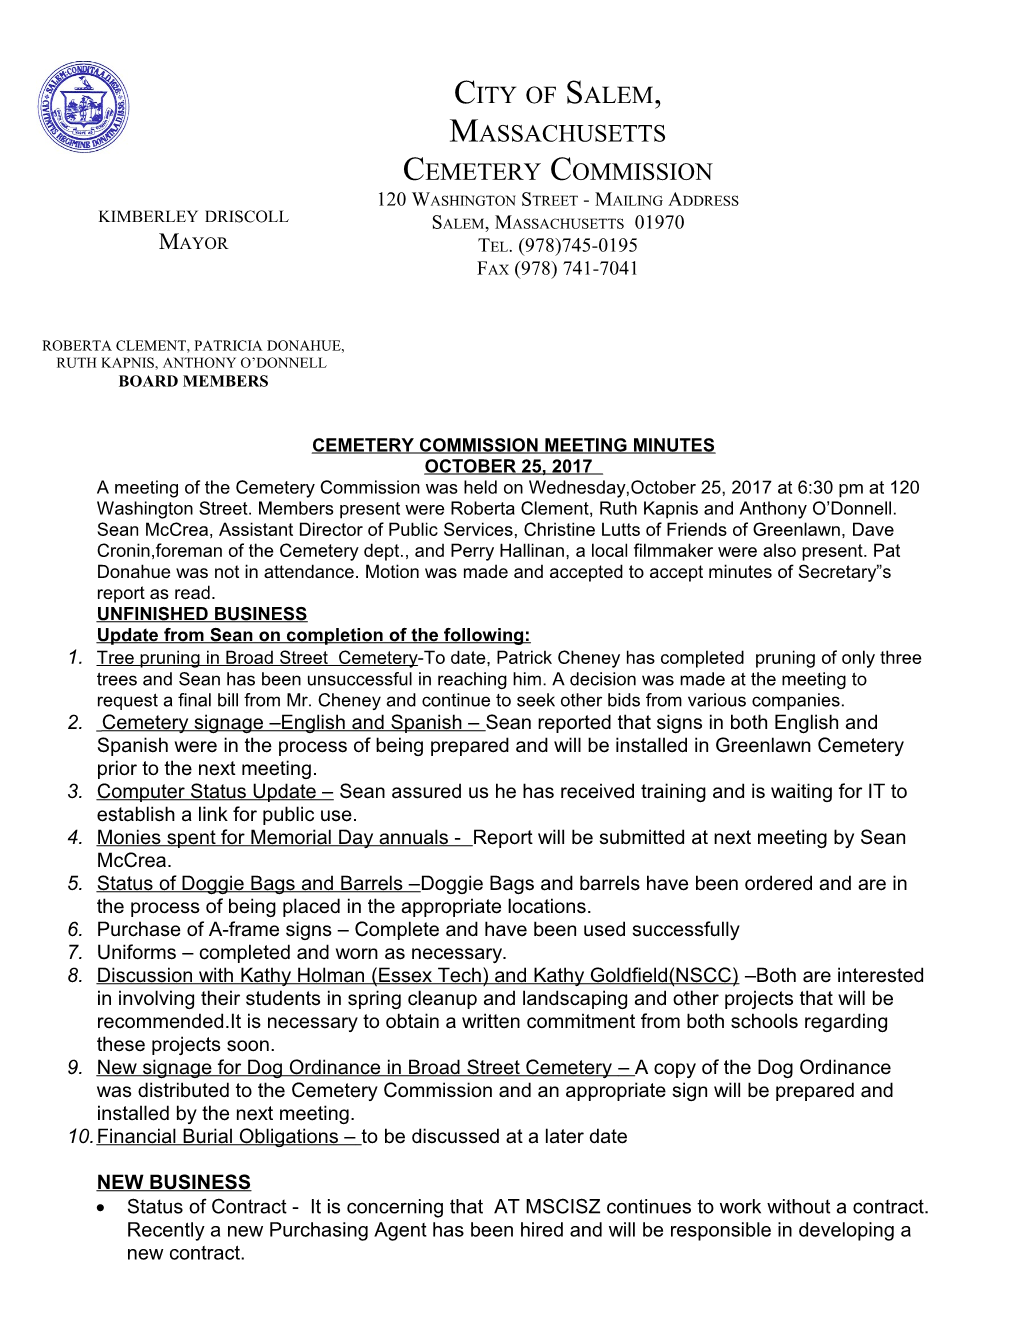 Cemetery Commission Meeting Minutes